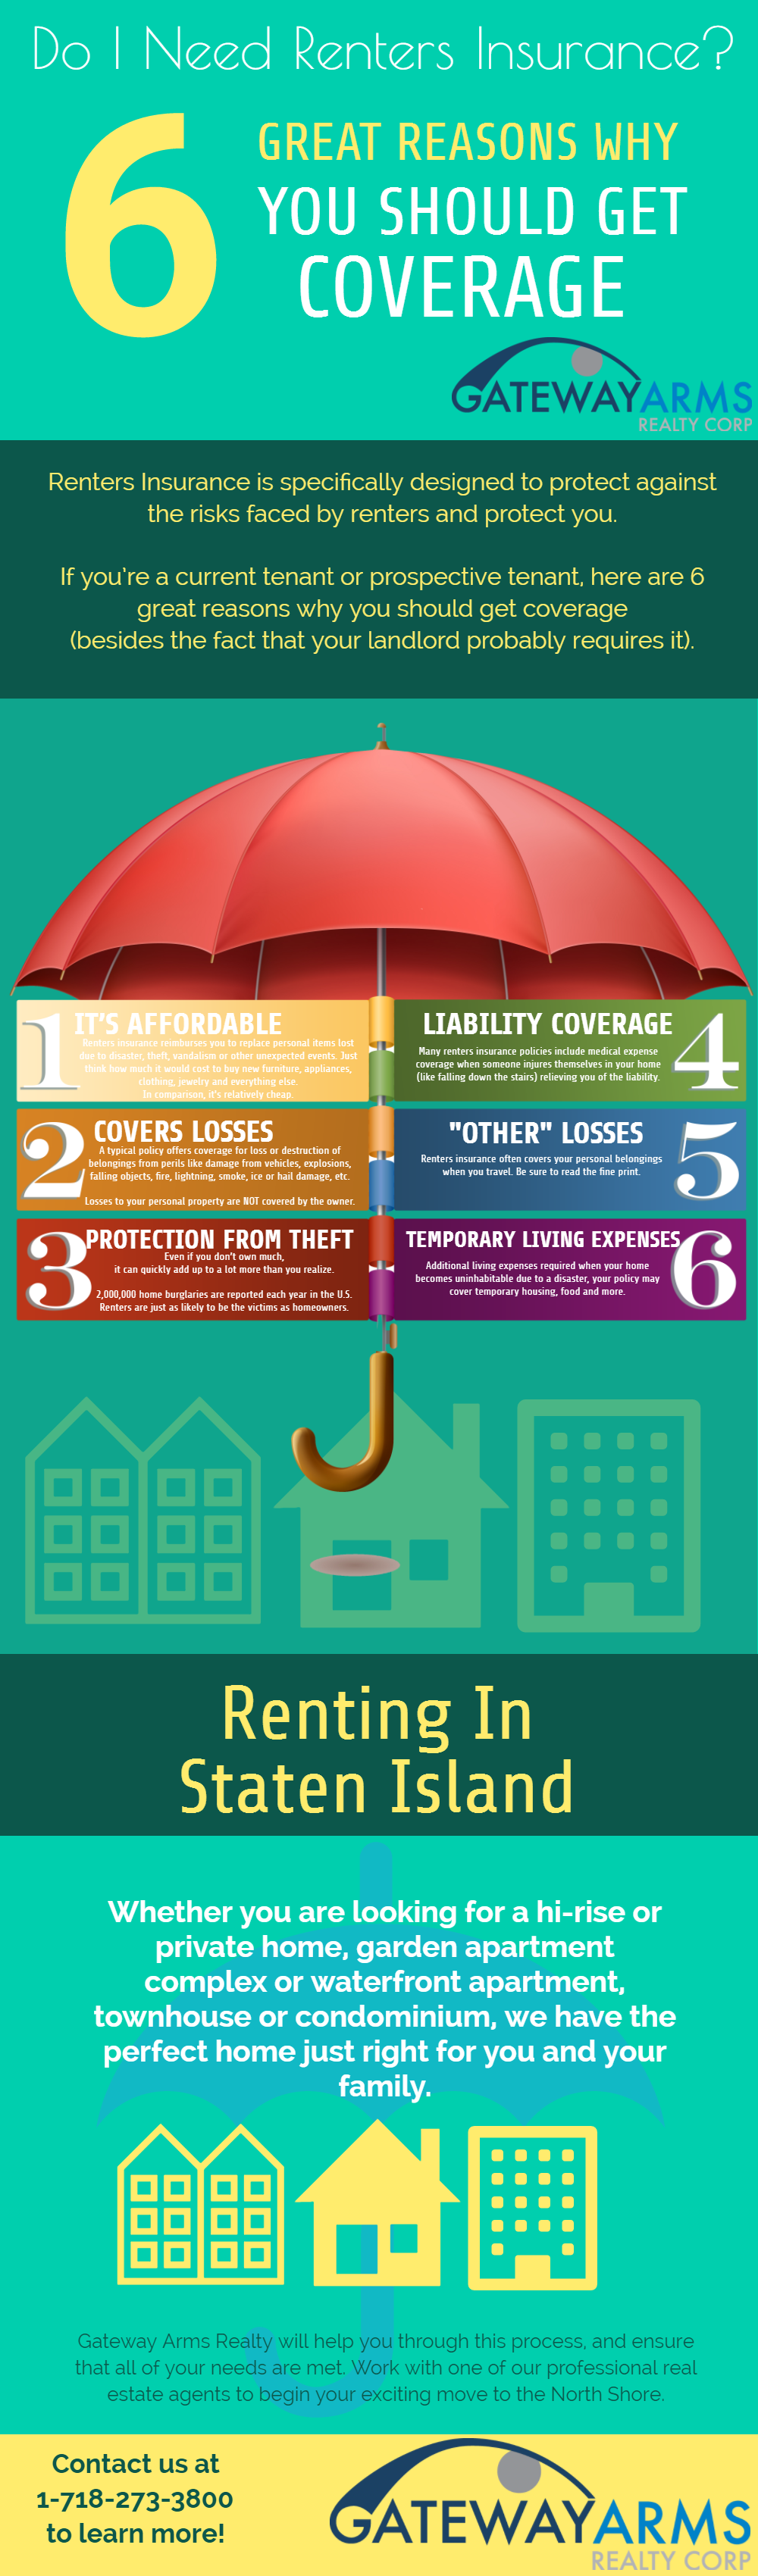 Why You Should Consider Getting Coverage With Renters Insurance